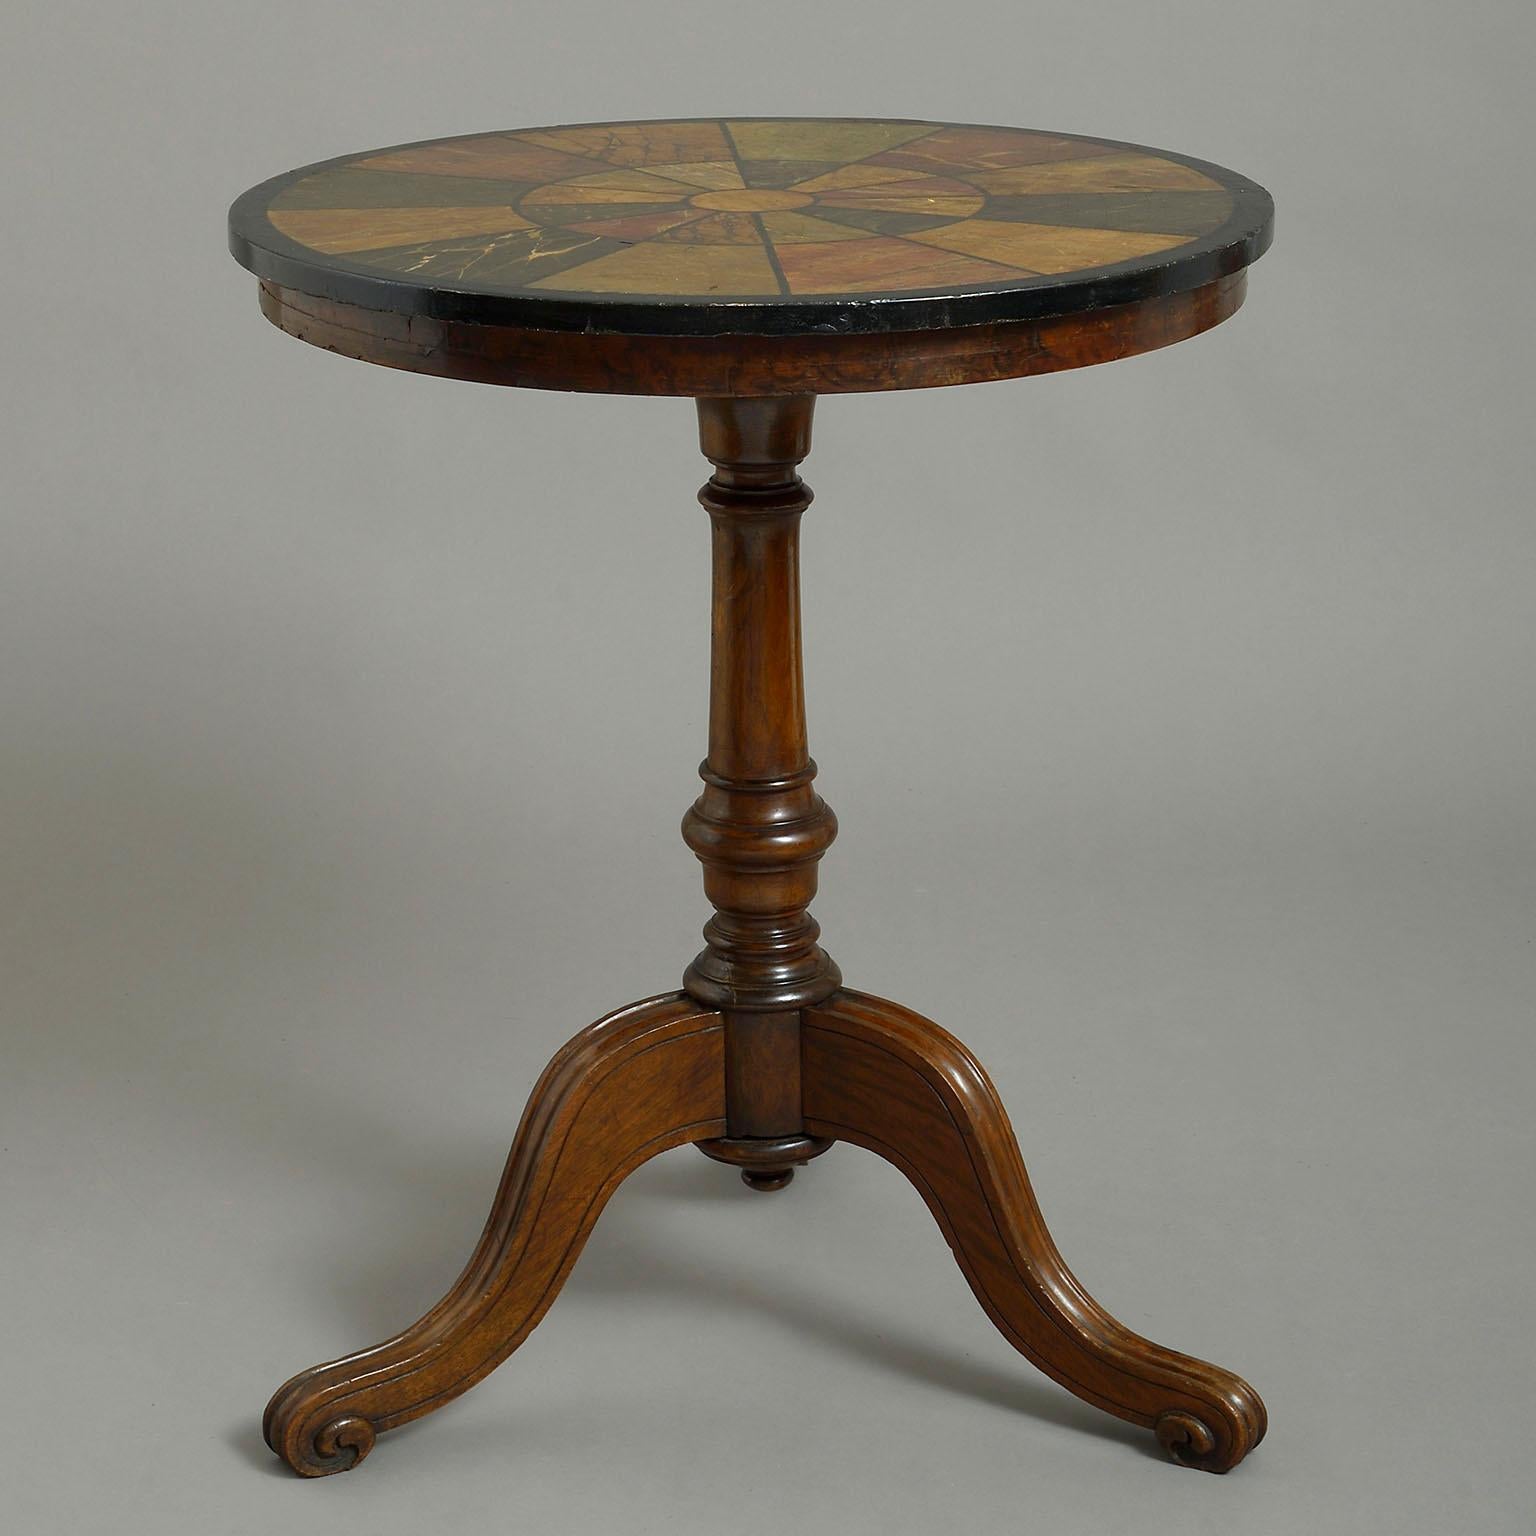 A 19th century Victorian walnut tripod table, the circular slate top with faux specimen marble decoration, raised on a turned stem and tripod base.